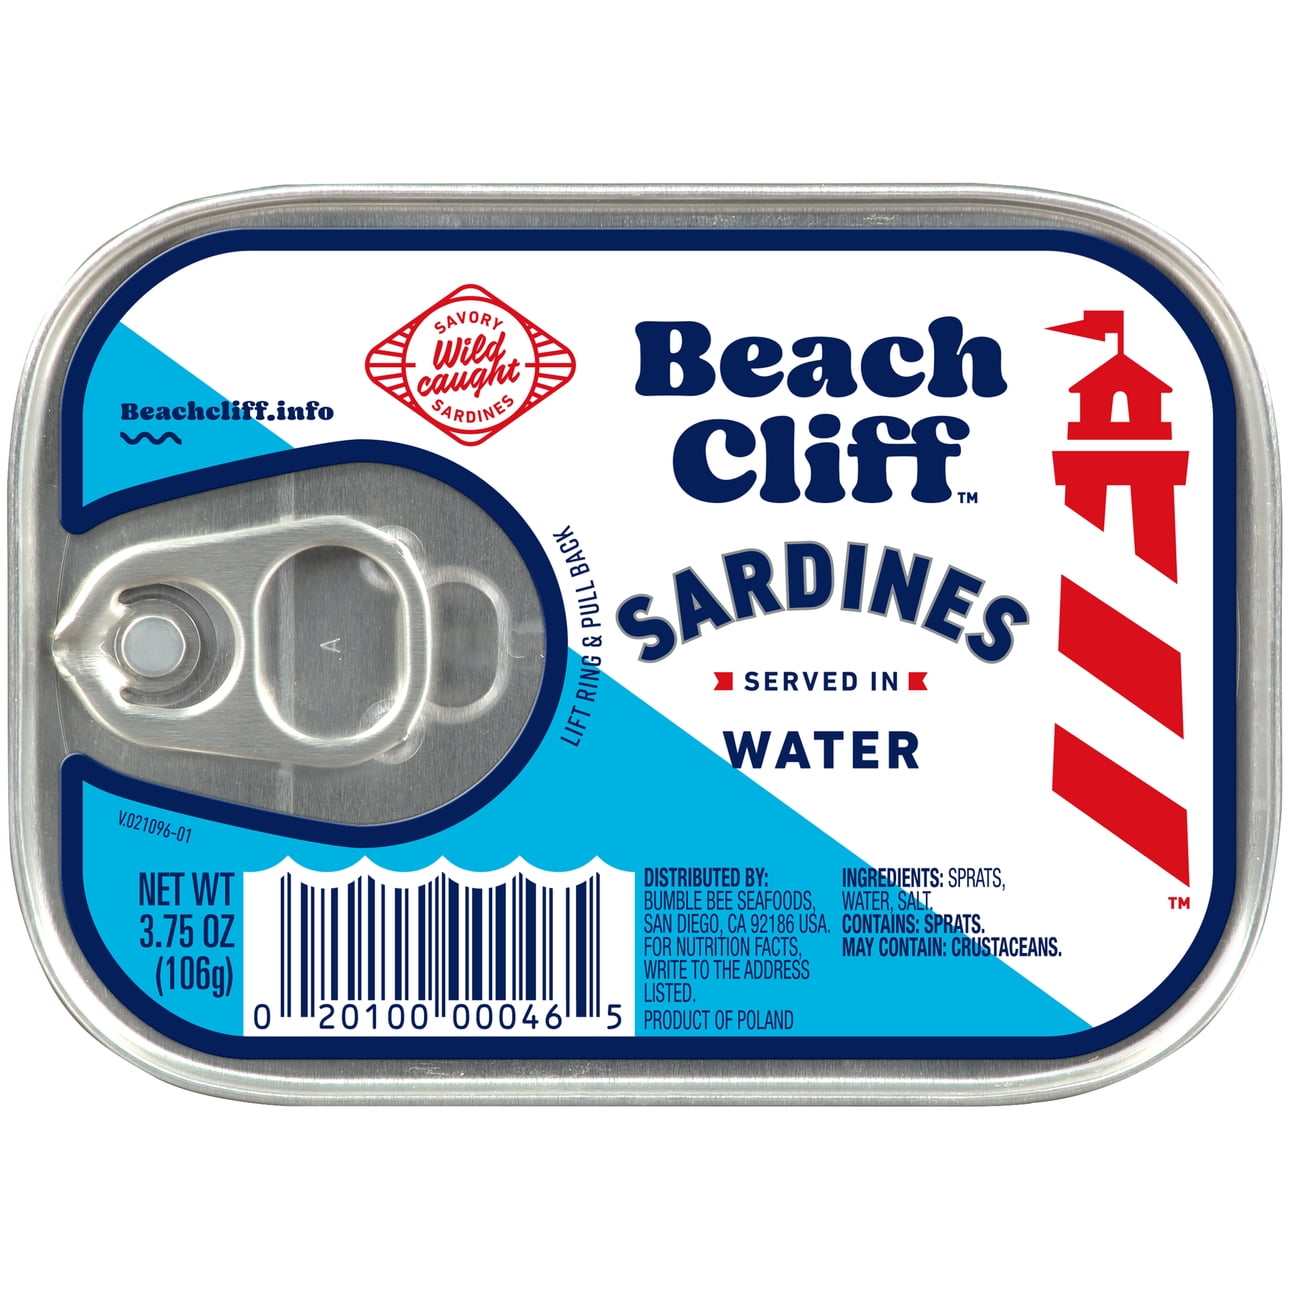 Beach Cliff Sardines in Water, 3.75 oz Can, Shelf Stable Canned